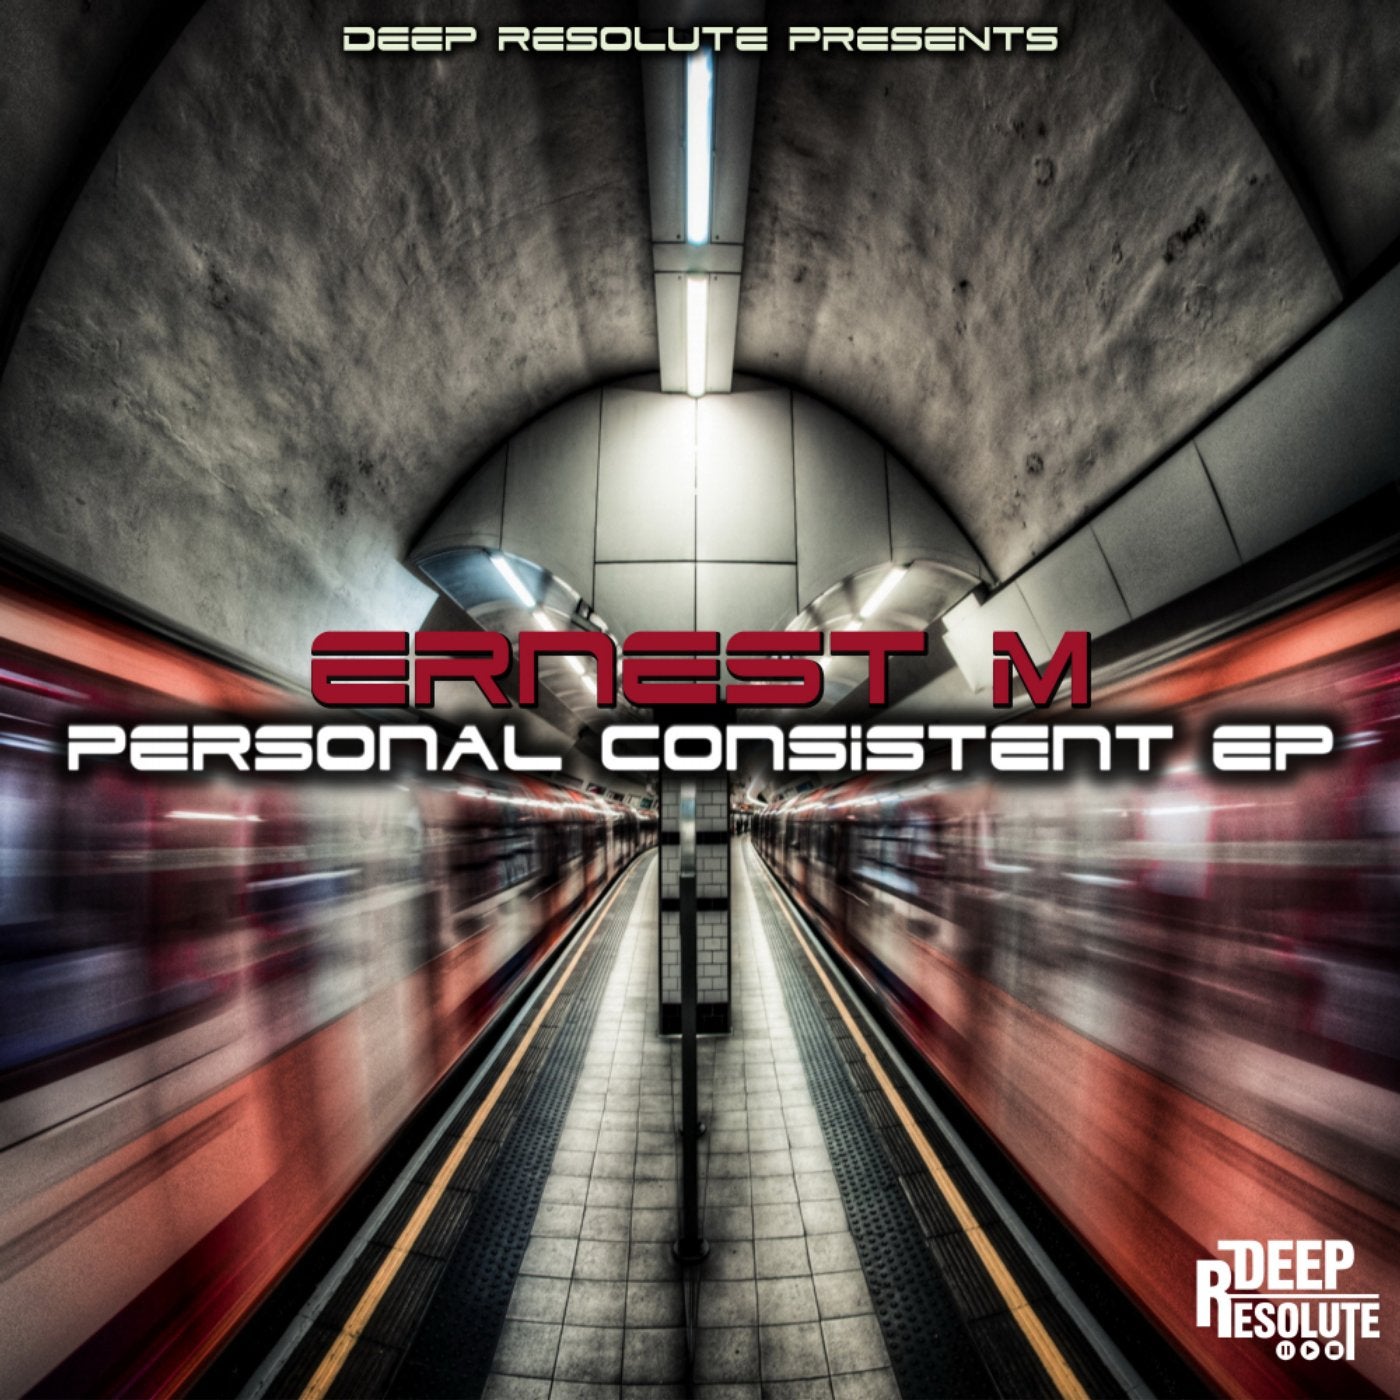 Personal Consistent EP